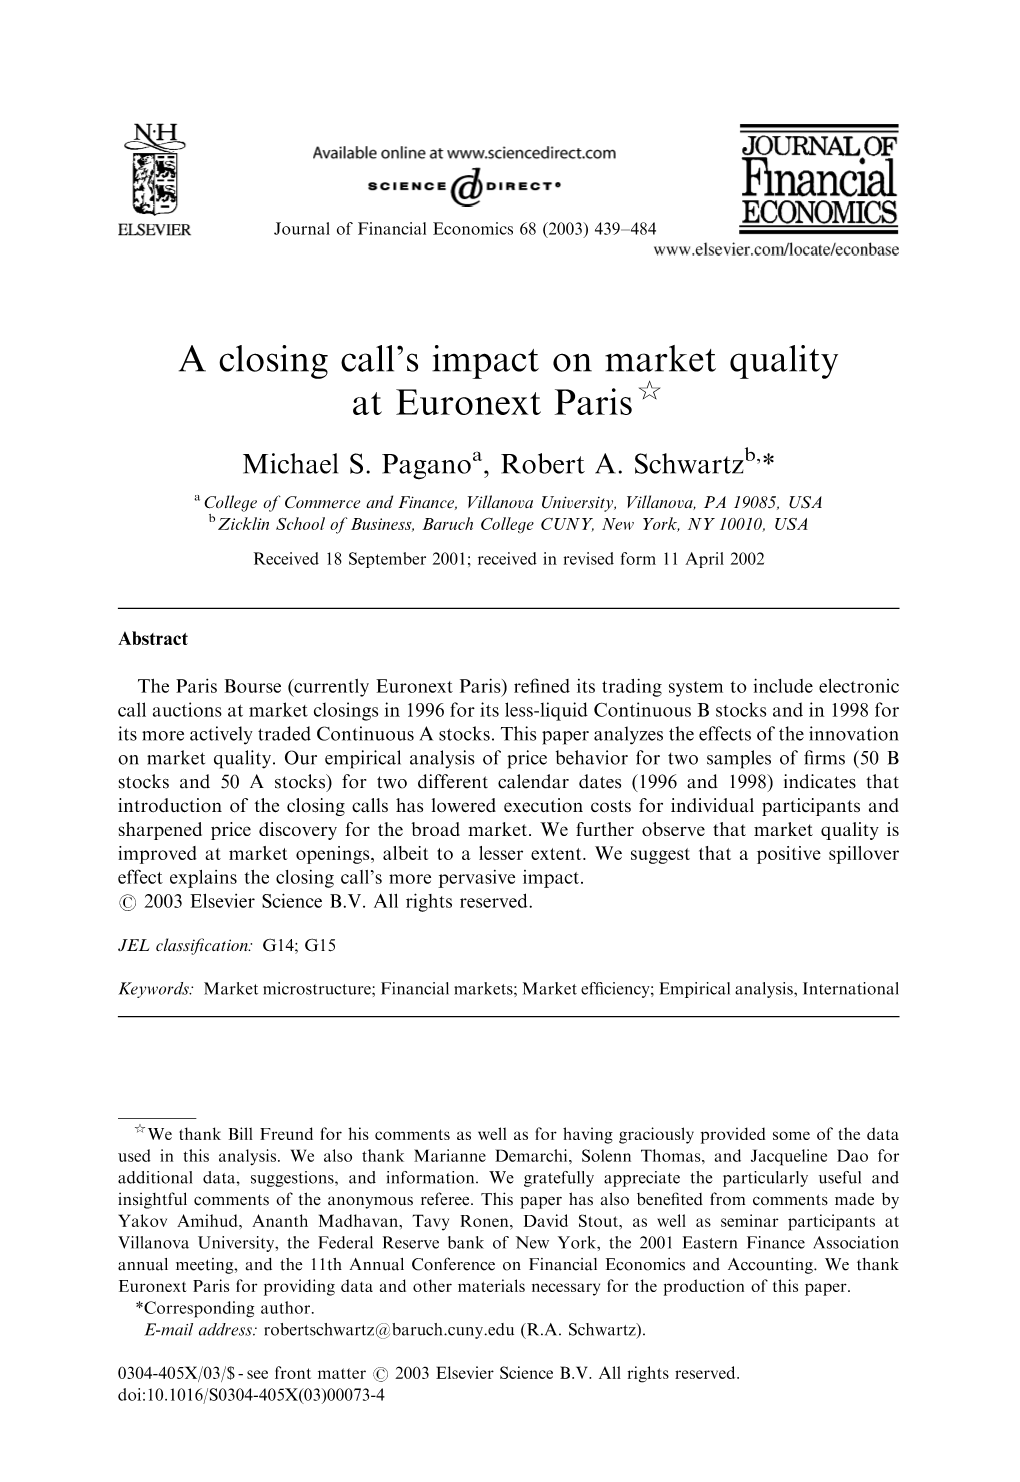 A Closing Call's Impact on Market Quality at Euronext Paris